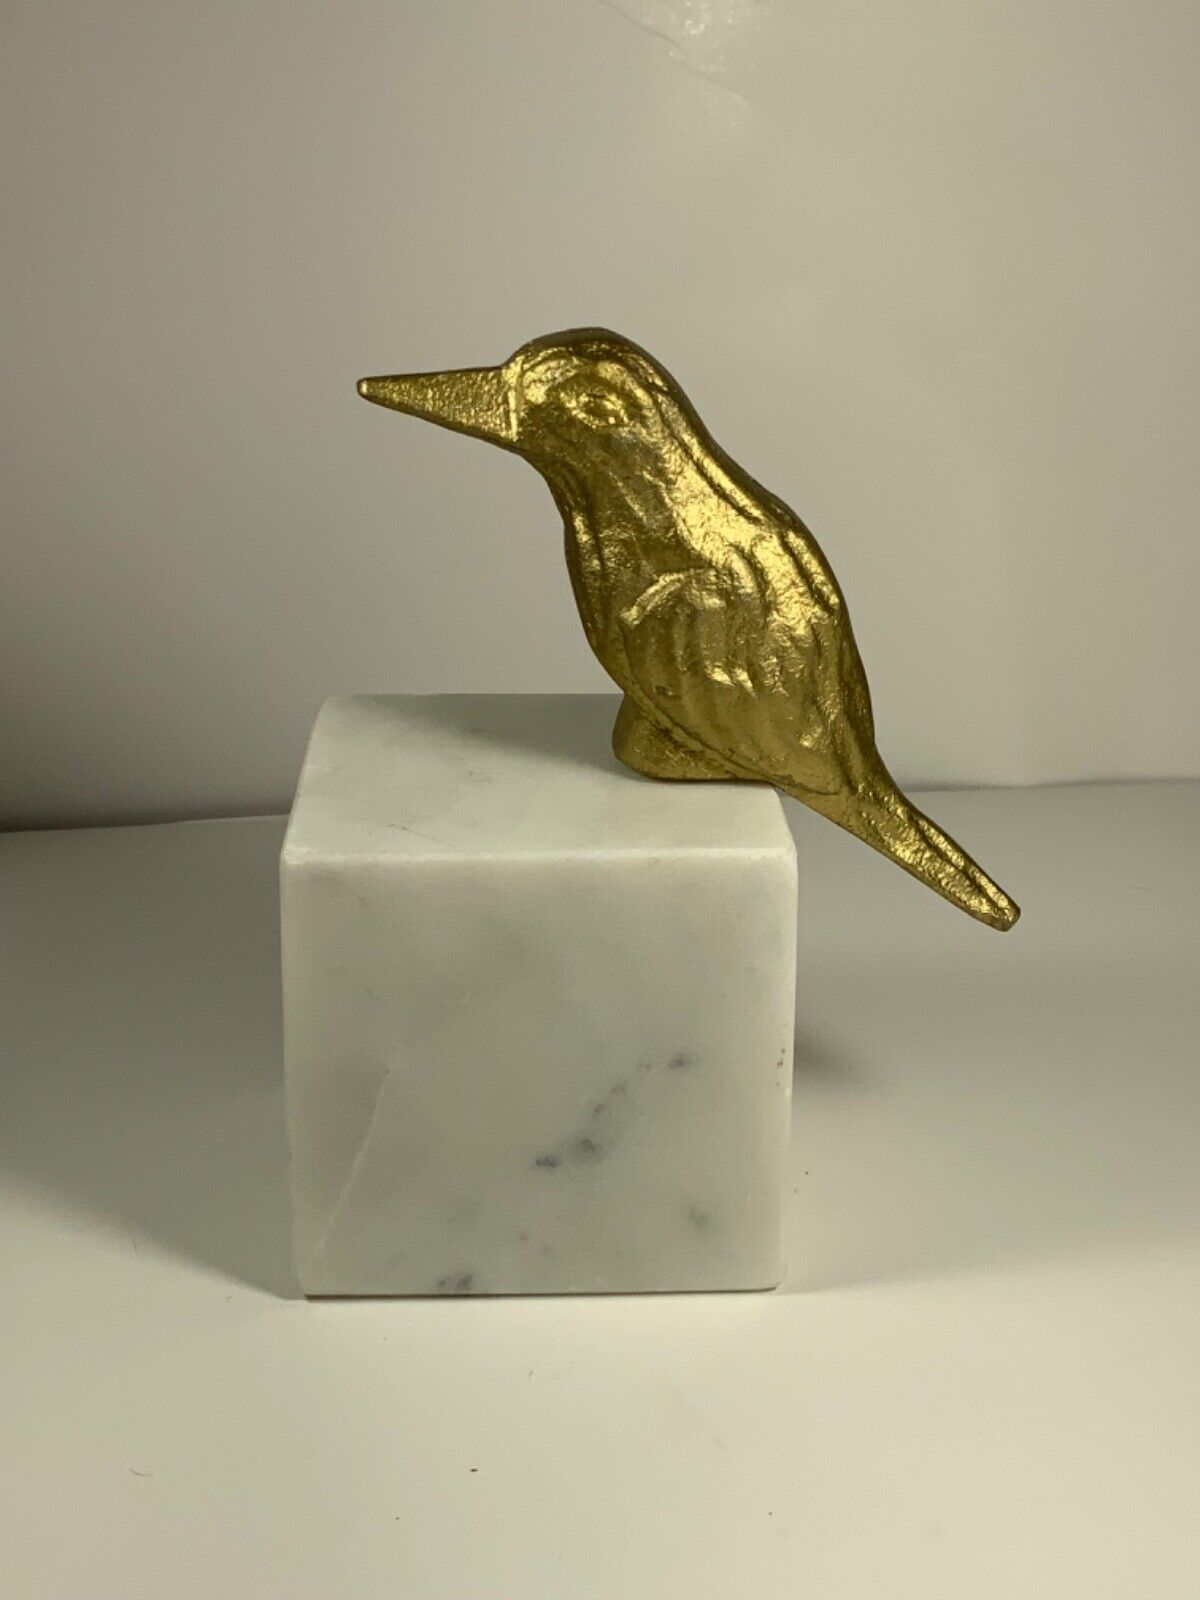 Vintage Solid Brass Bird on Marble Block Paperweight/Statue 6.5 in.